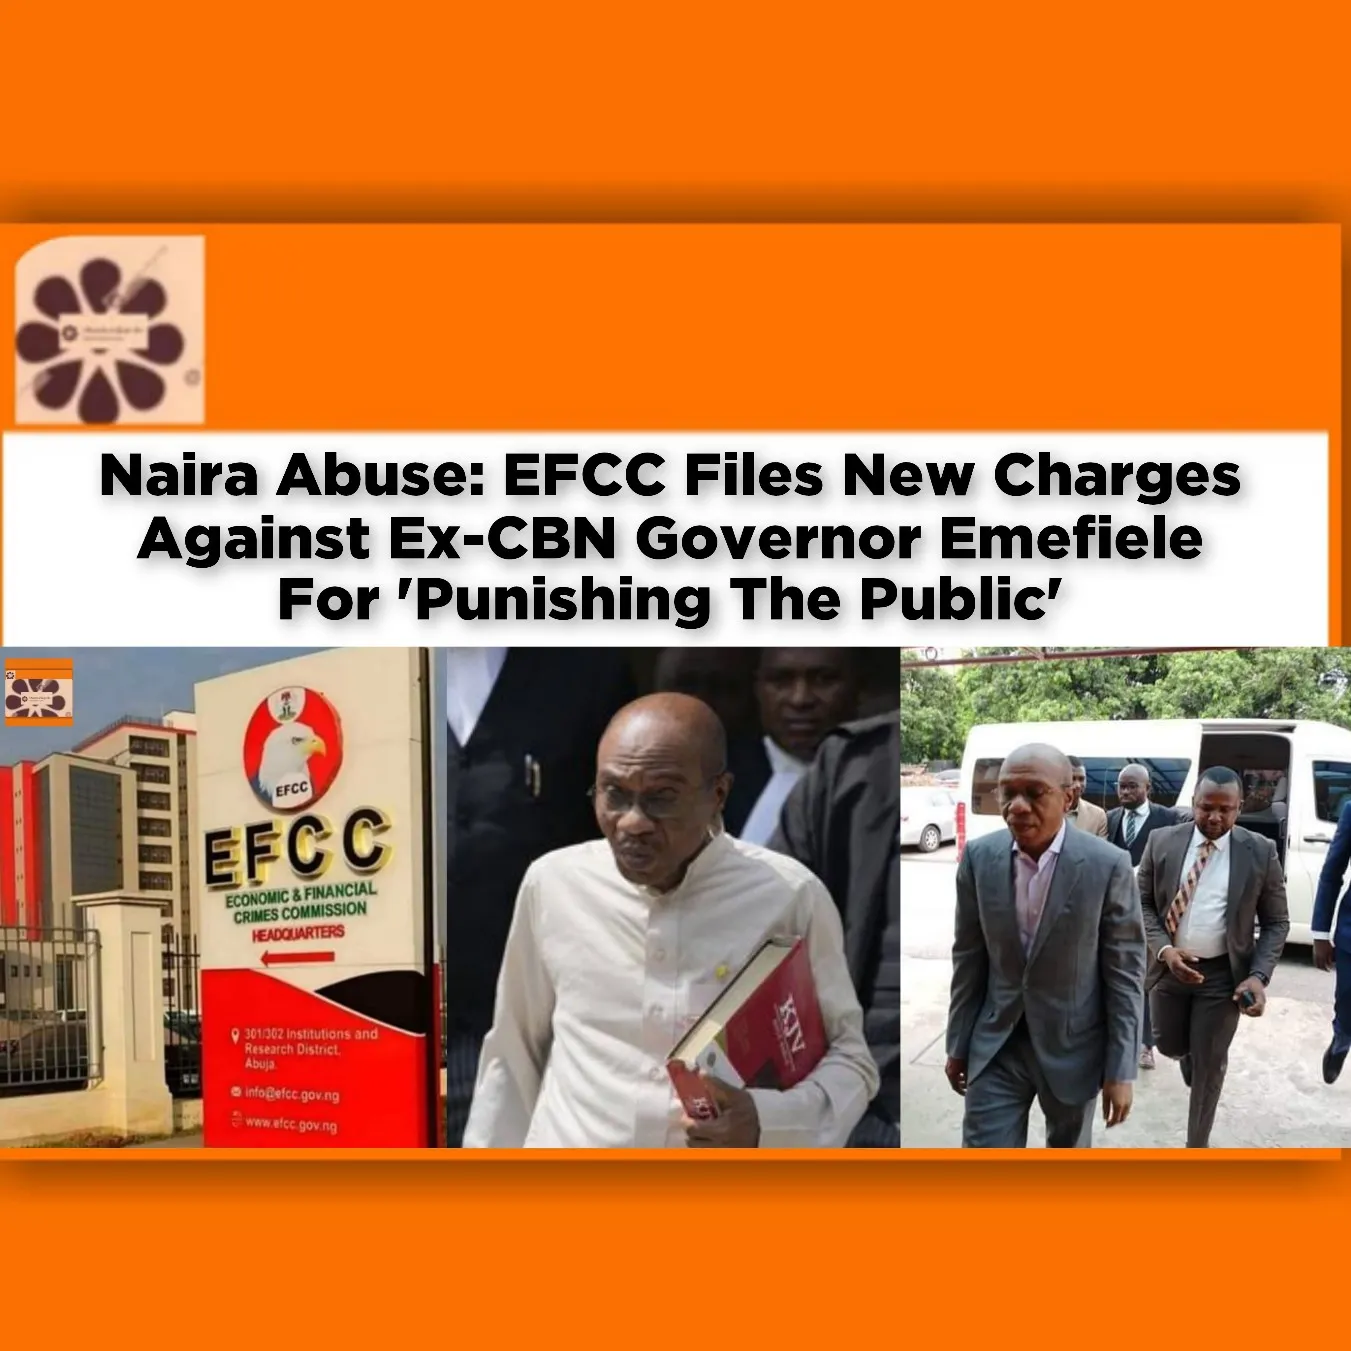 Naira Abuse: EFCC Files New Charges Against Ex-CBN Governor Emefiele For 'Punishing The Public' ~ OsazuwaAkonedo #Marriage